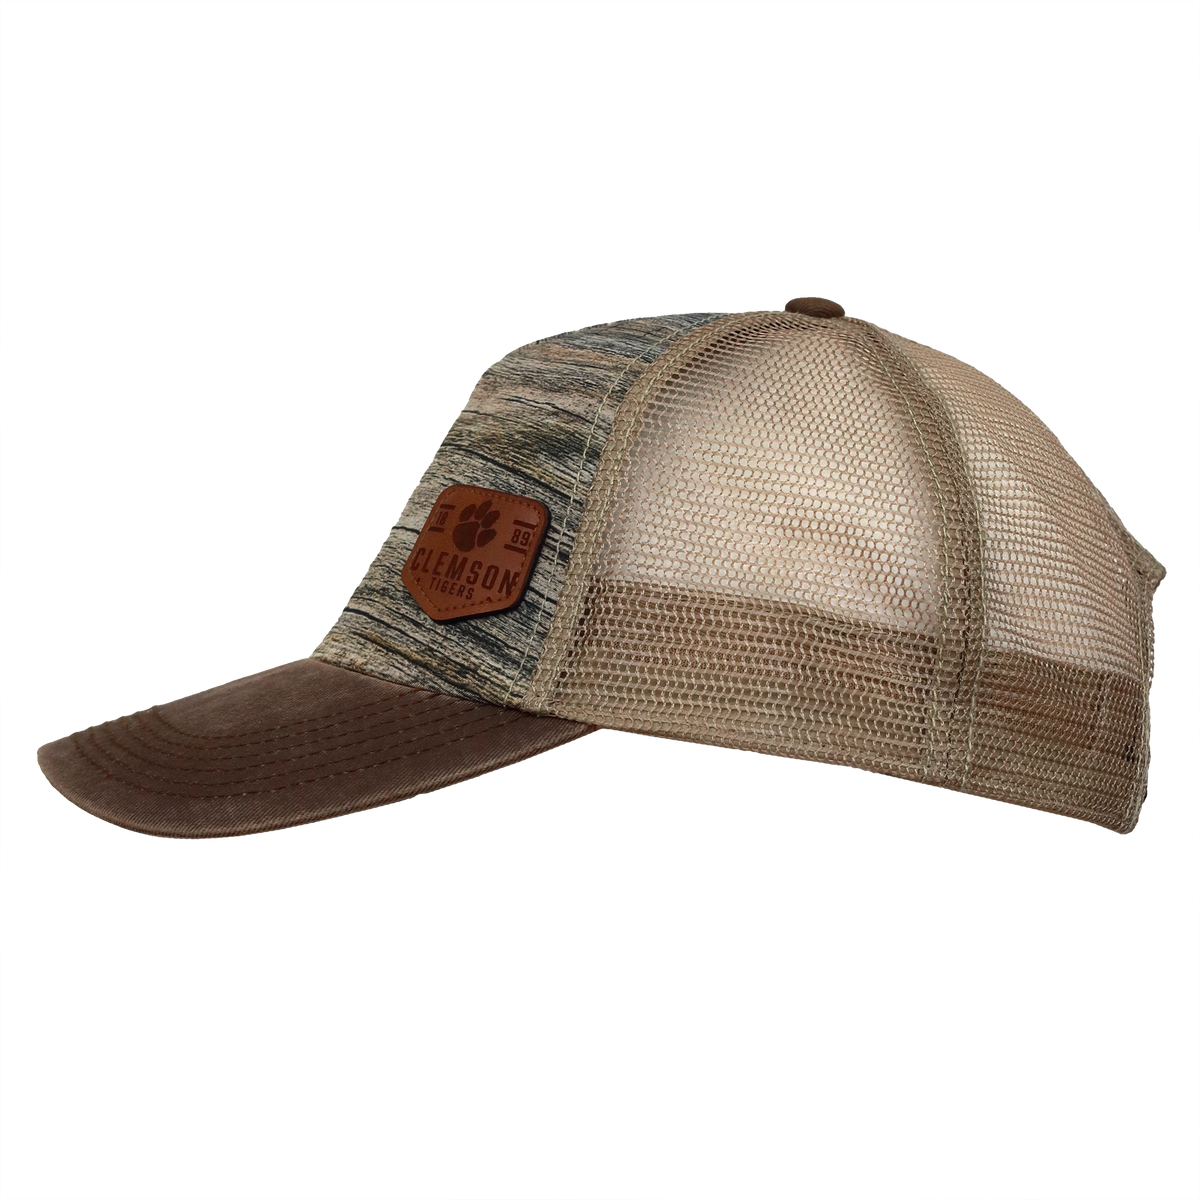 OFAS Fossil Trucker with Clemson Engraved Leather Design